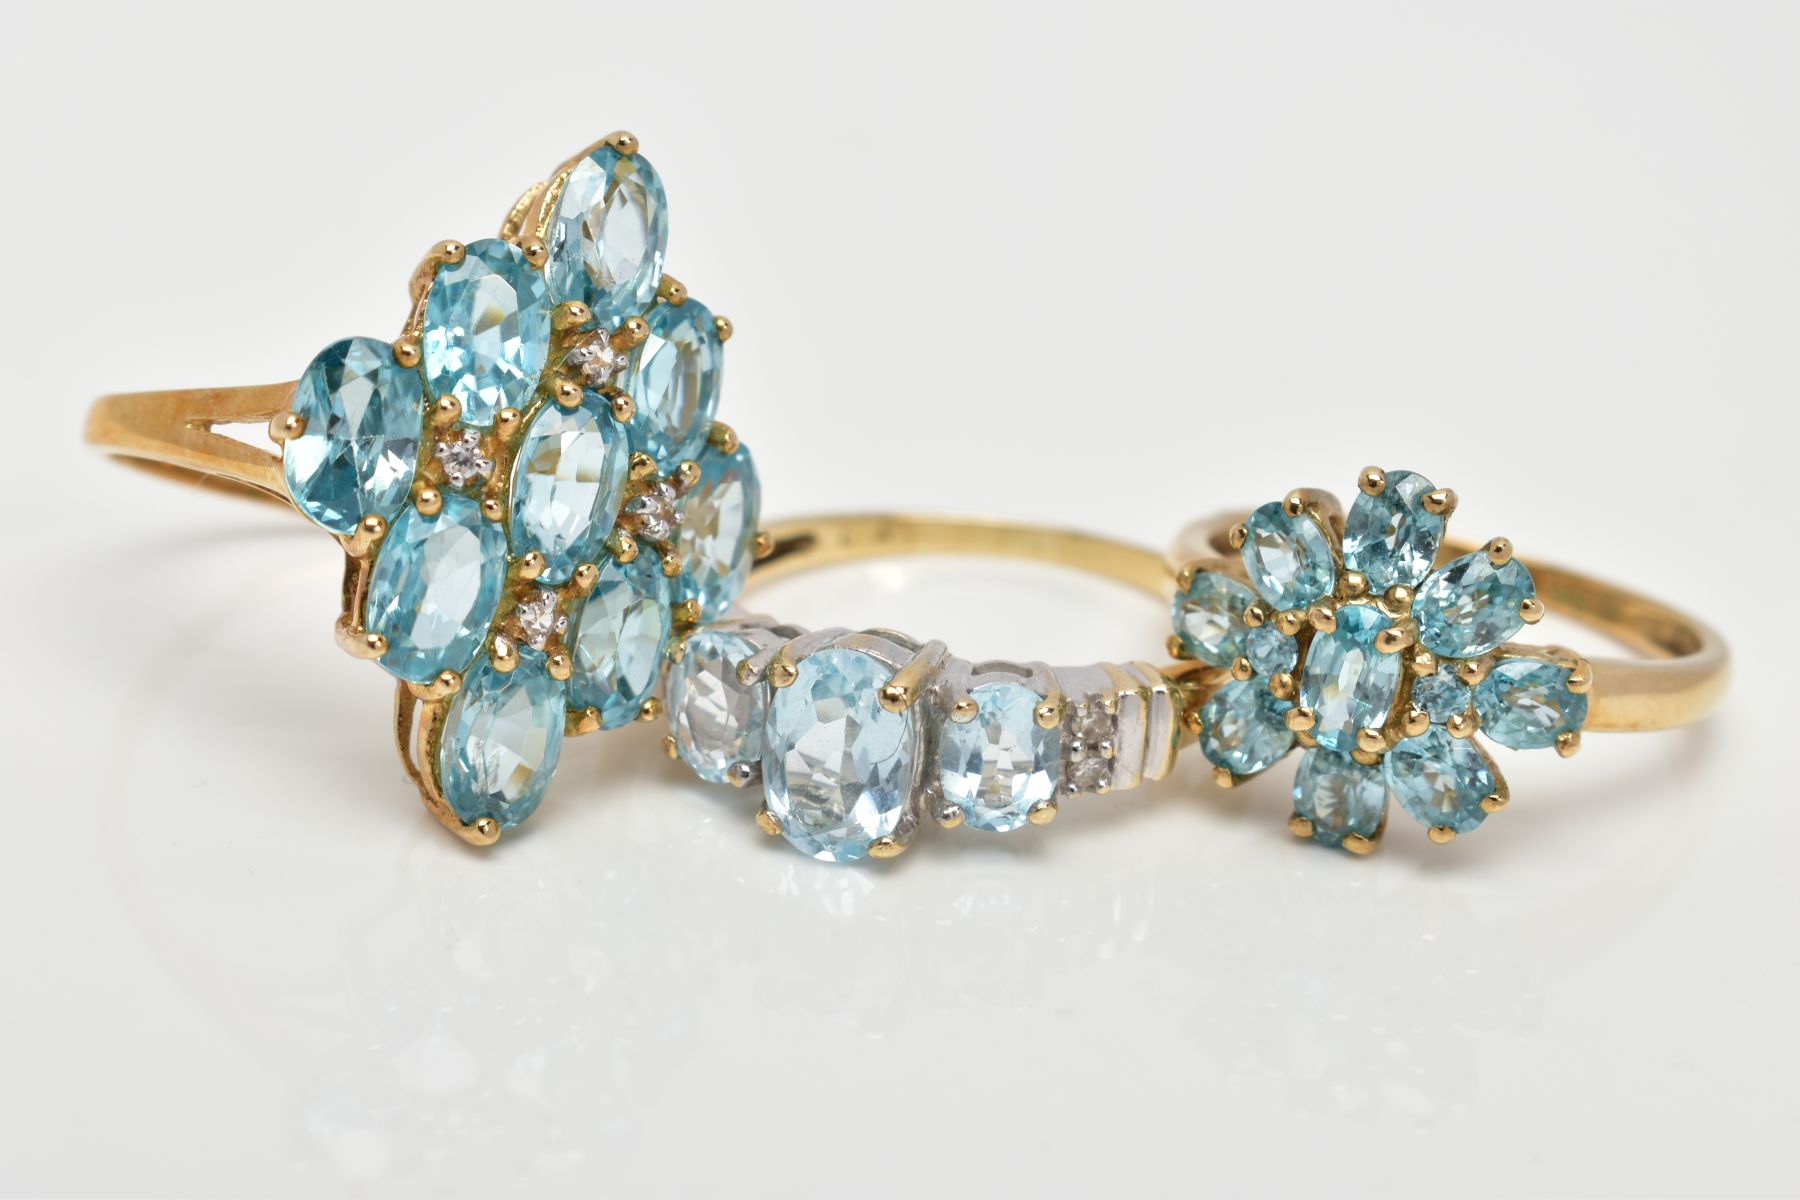 THREE 9CT GOLD BLUE TOPAZ DRESS RINGS, two designed as clusters, ring sizes O, hallmarked 9ct gold - Image 2 of 3